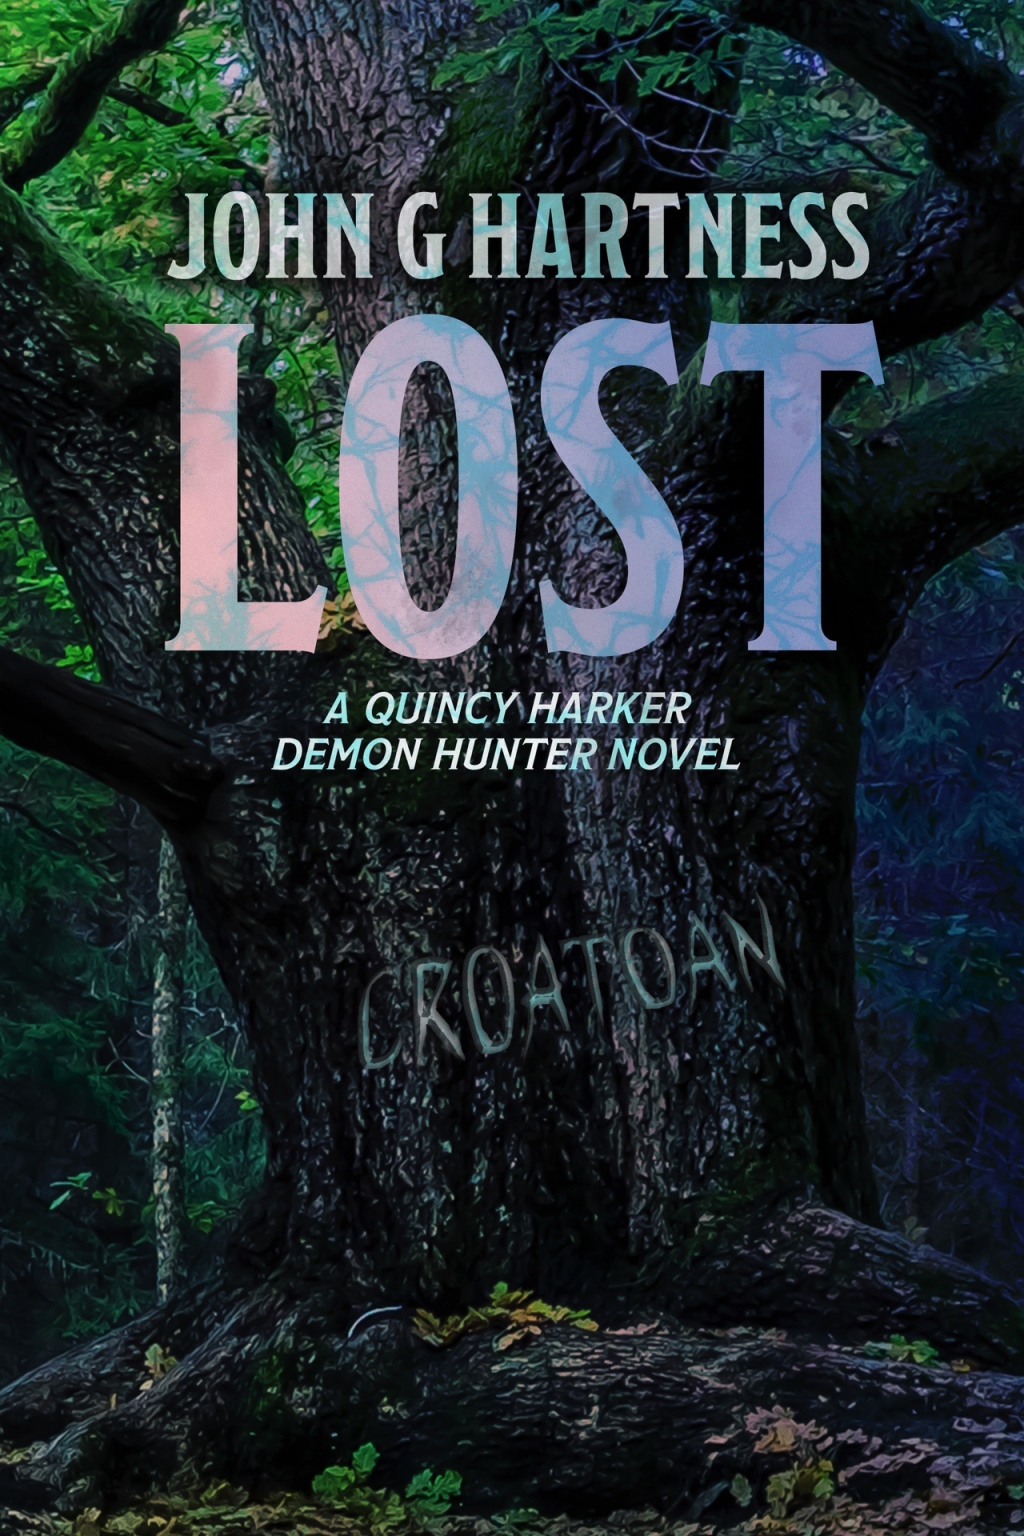 Lost – A good story ruined by woke rubbish.